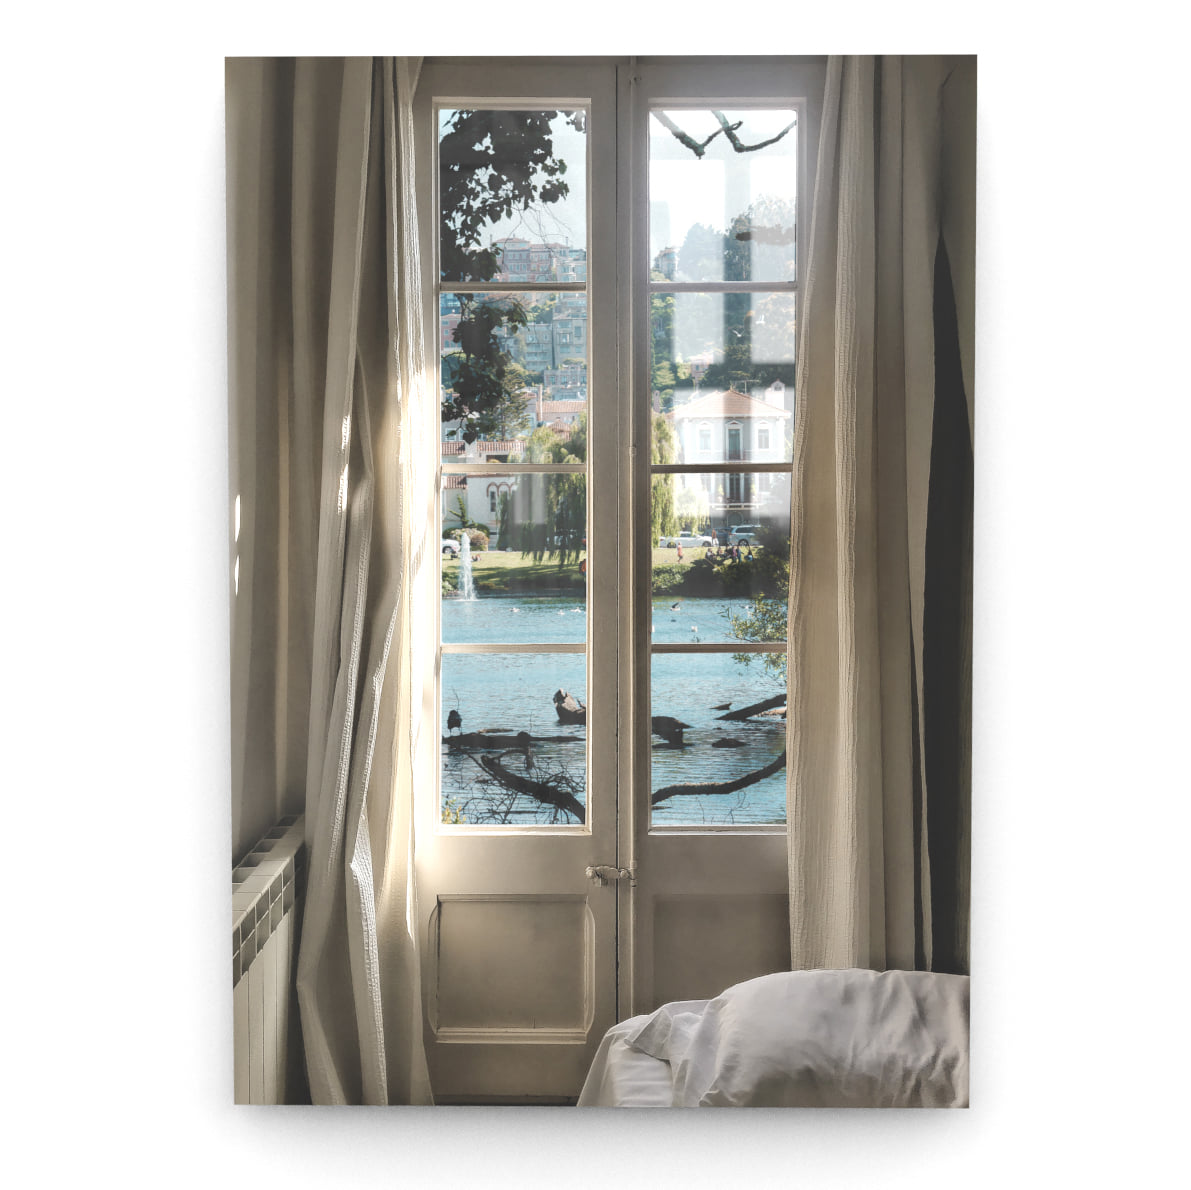 Glass window poster - a holiday bedroom #2